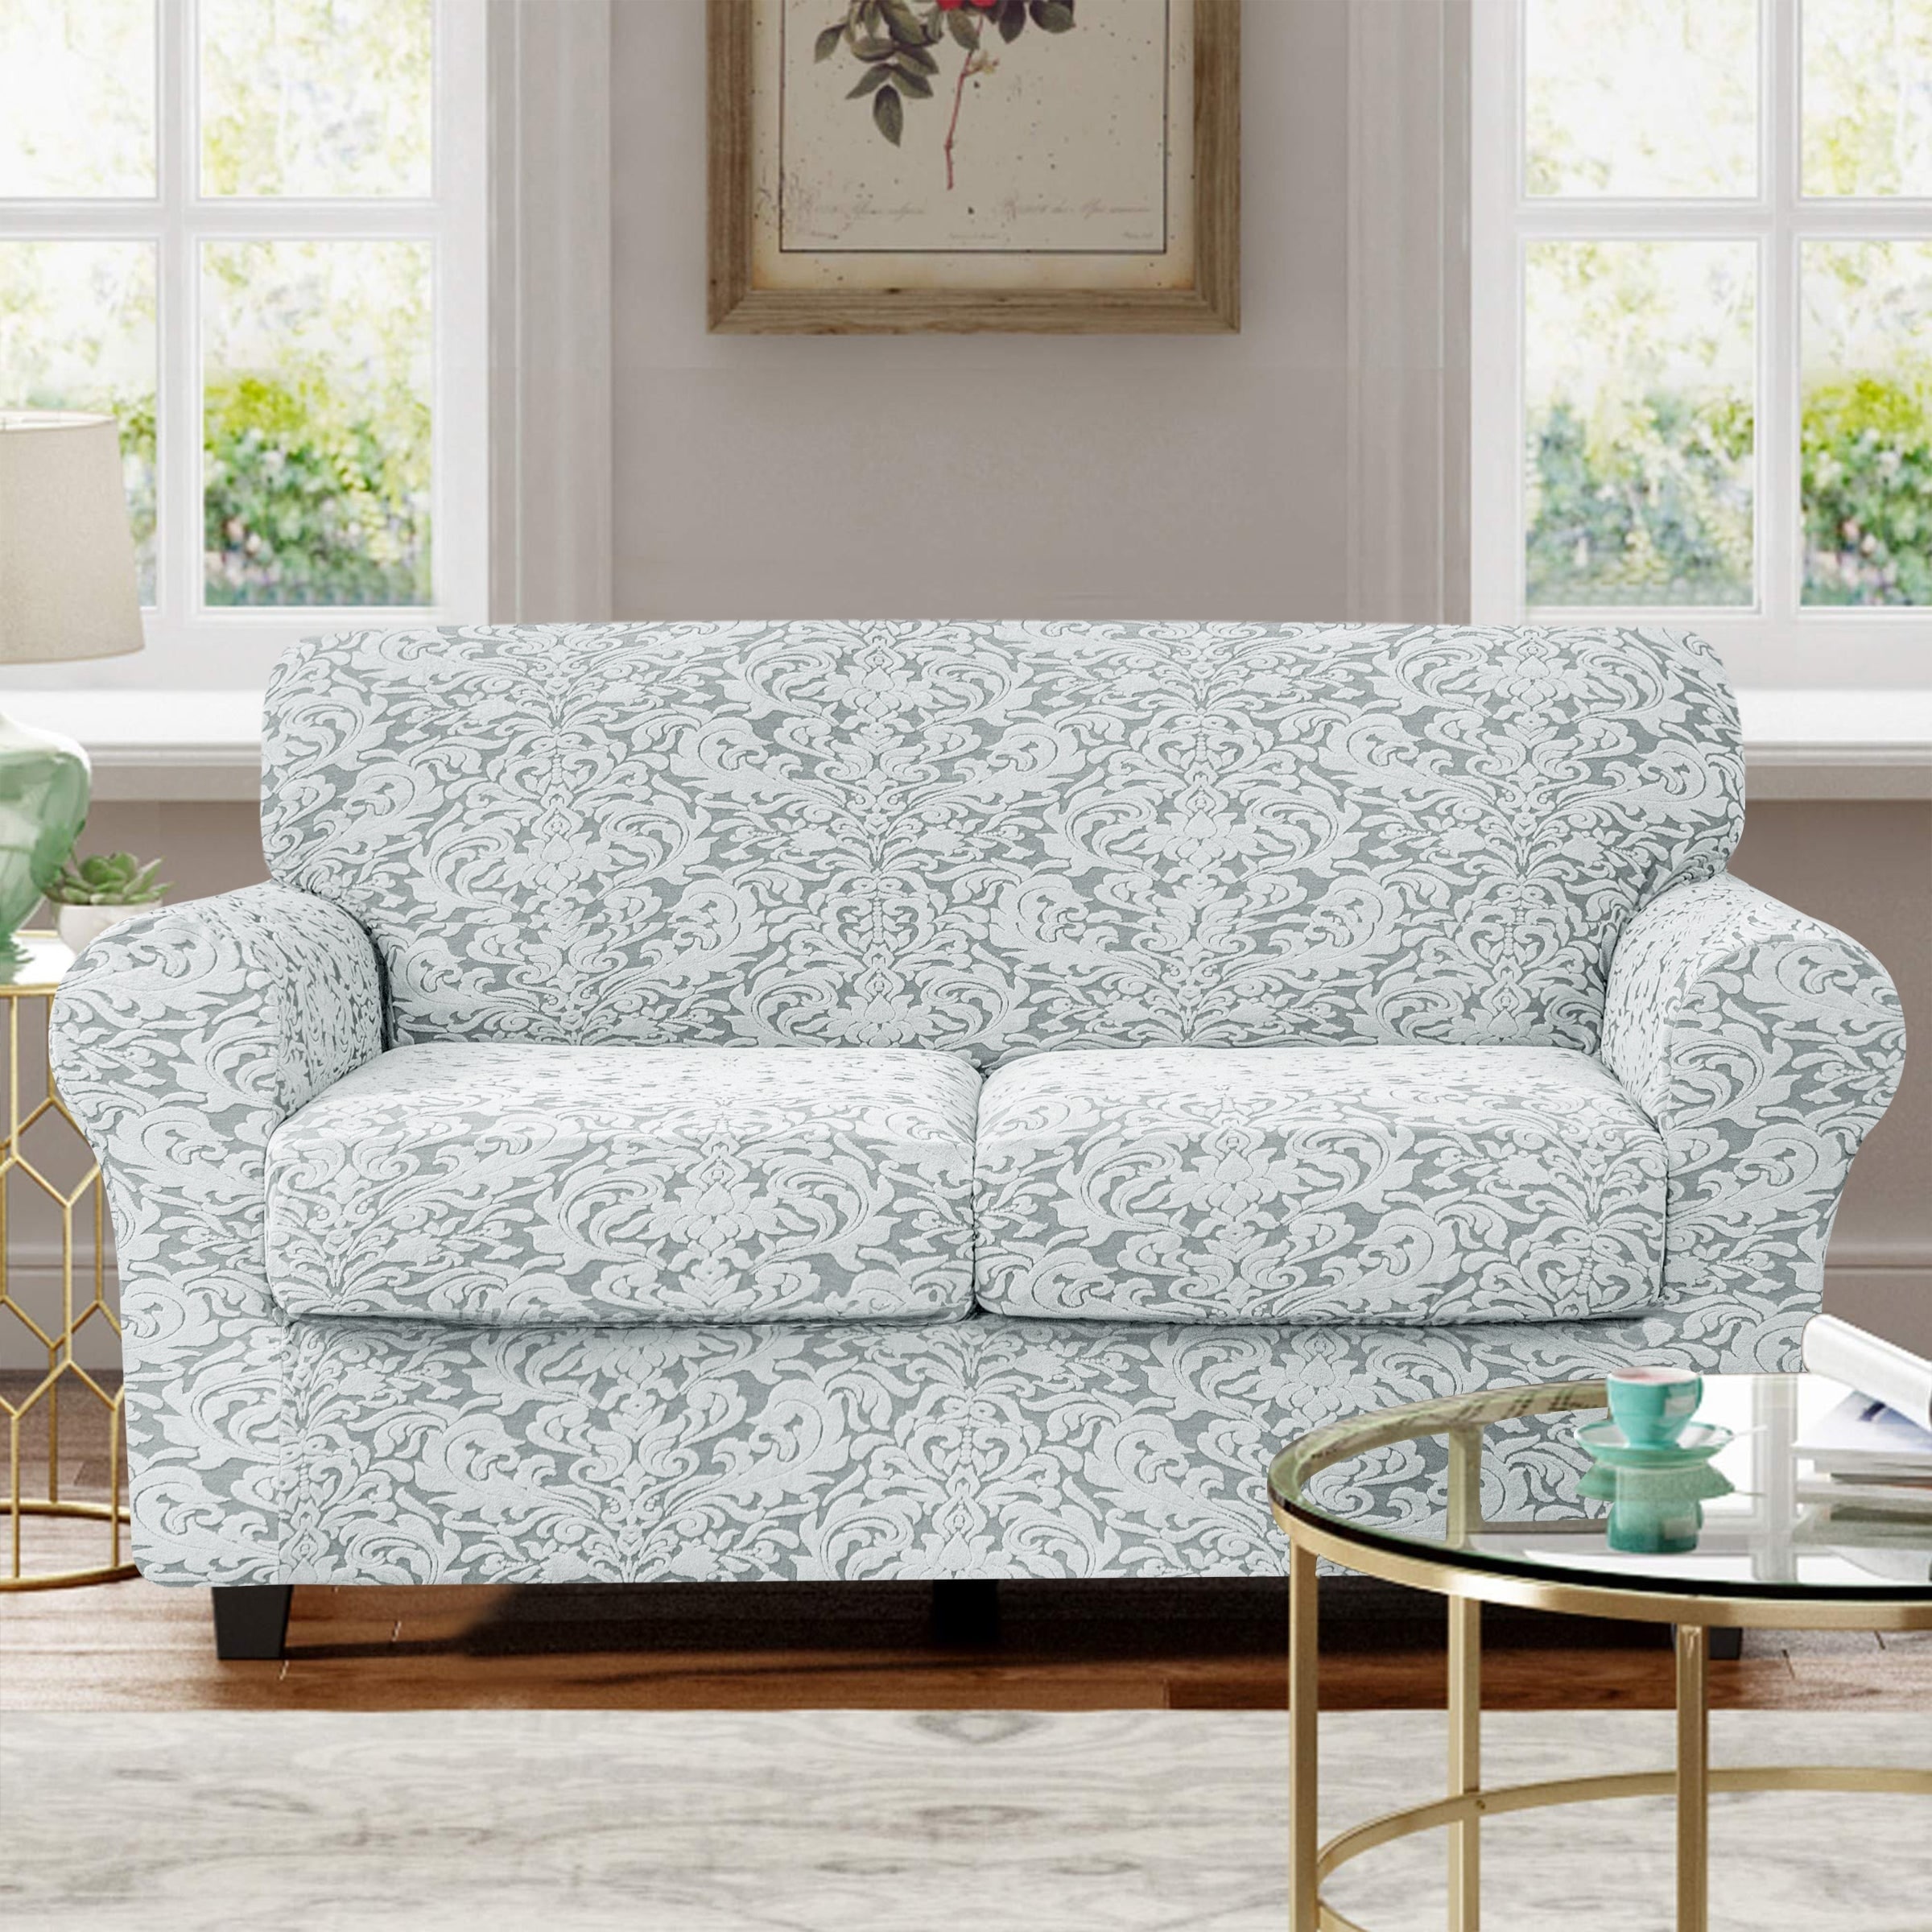 https://ak1.ostkcdn.com/images/products/is/images/direct/65dd3e91c9aaaa3016f1b147ec18cd2c8f76a5a0/Subrtex-Jacquard-Damask-Loveseat-Slipcover-Cover-with-2-Separate-Cushion-Cover.jpg